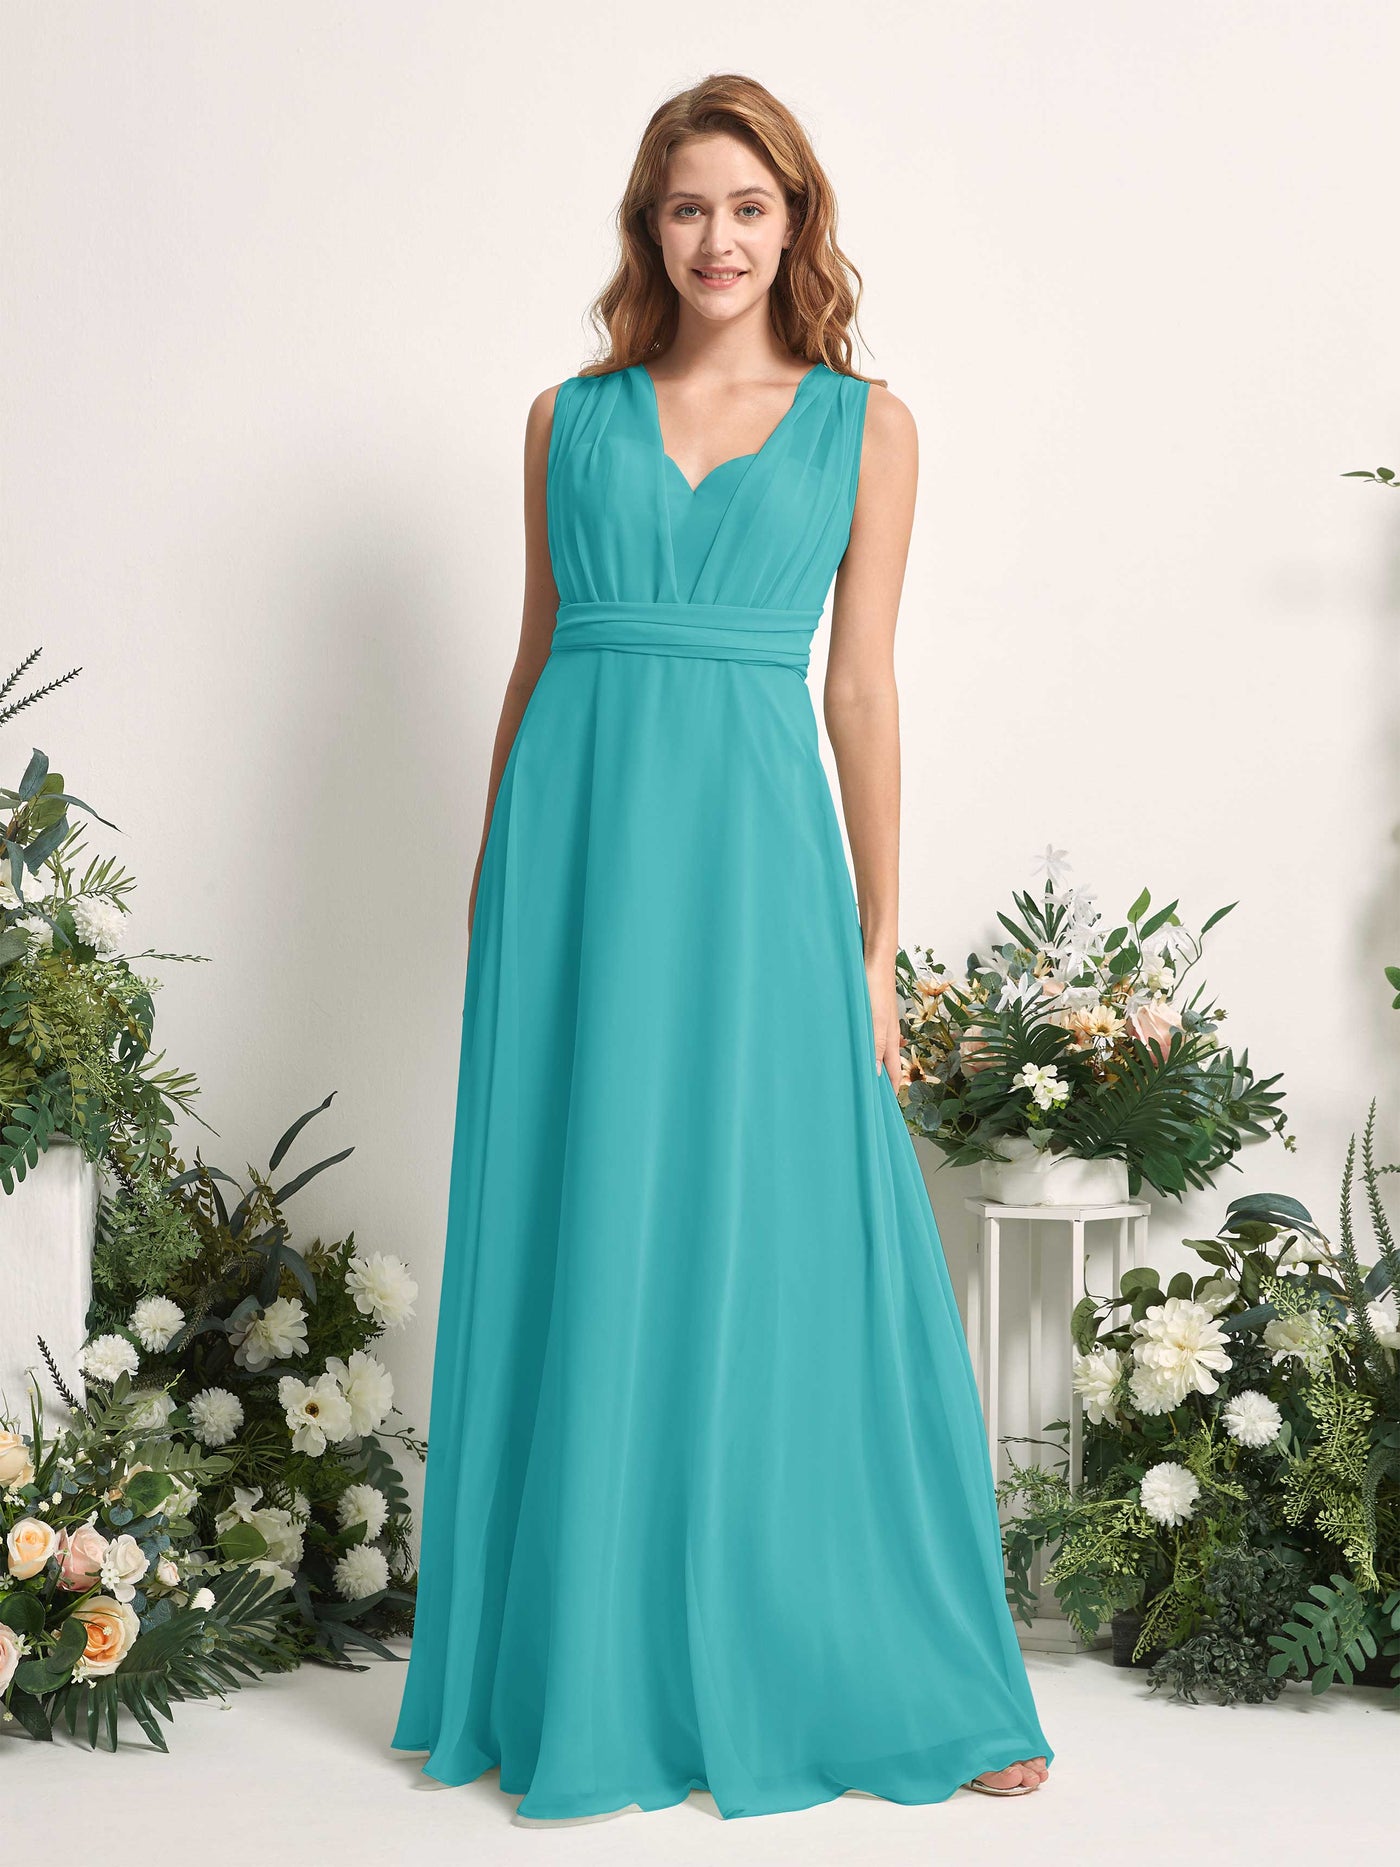 Turquoise Bridesmaid Dresses Bridesmaid Dress A-line Chiffon Halter Full Length Short Sleeves Wedding Party Dress (81226323)#color_turquoise